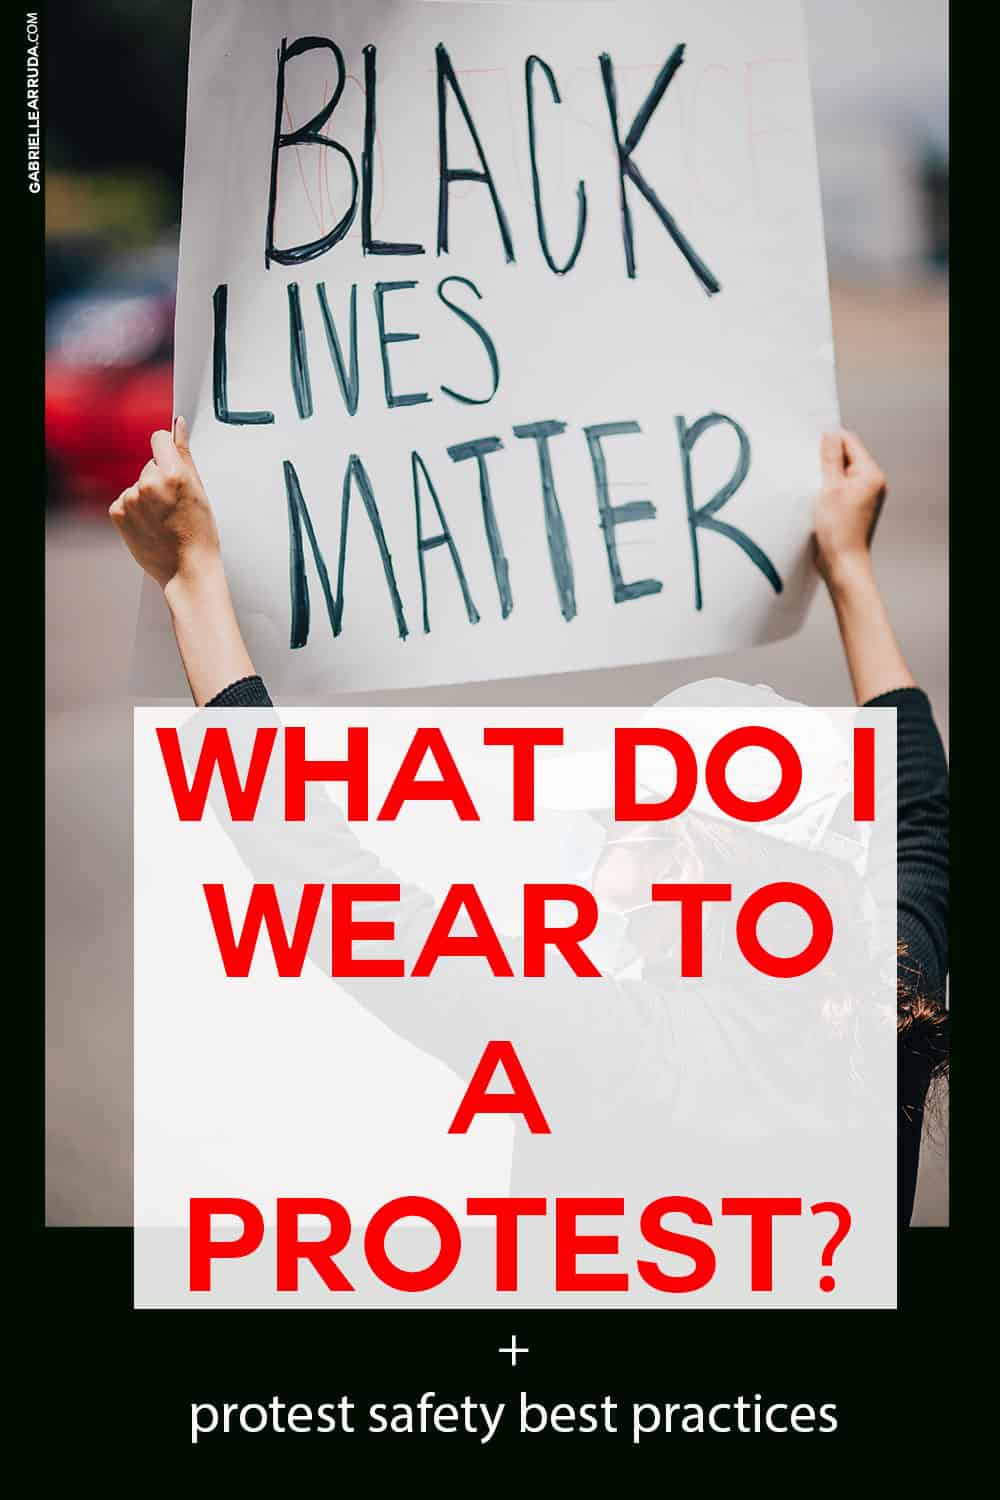 what should i wear to a protest, #blm protest image